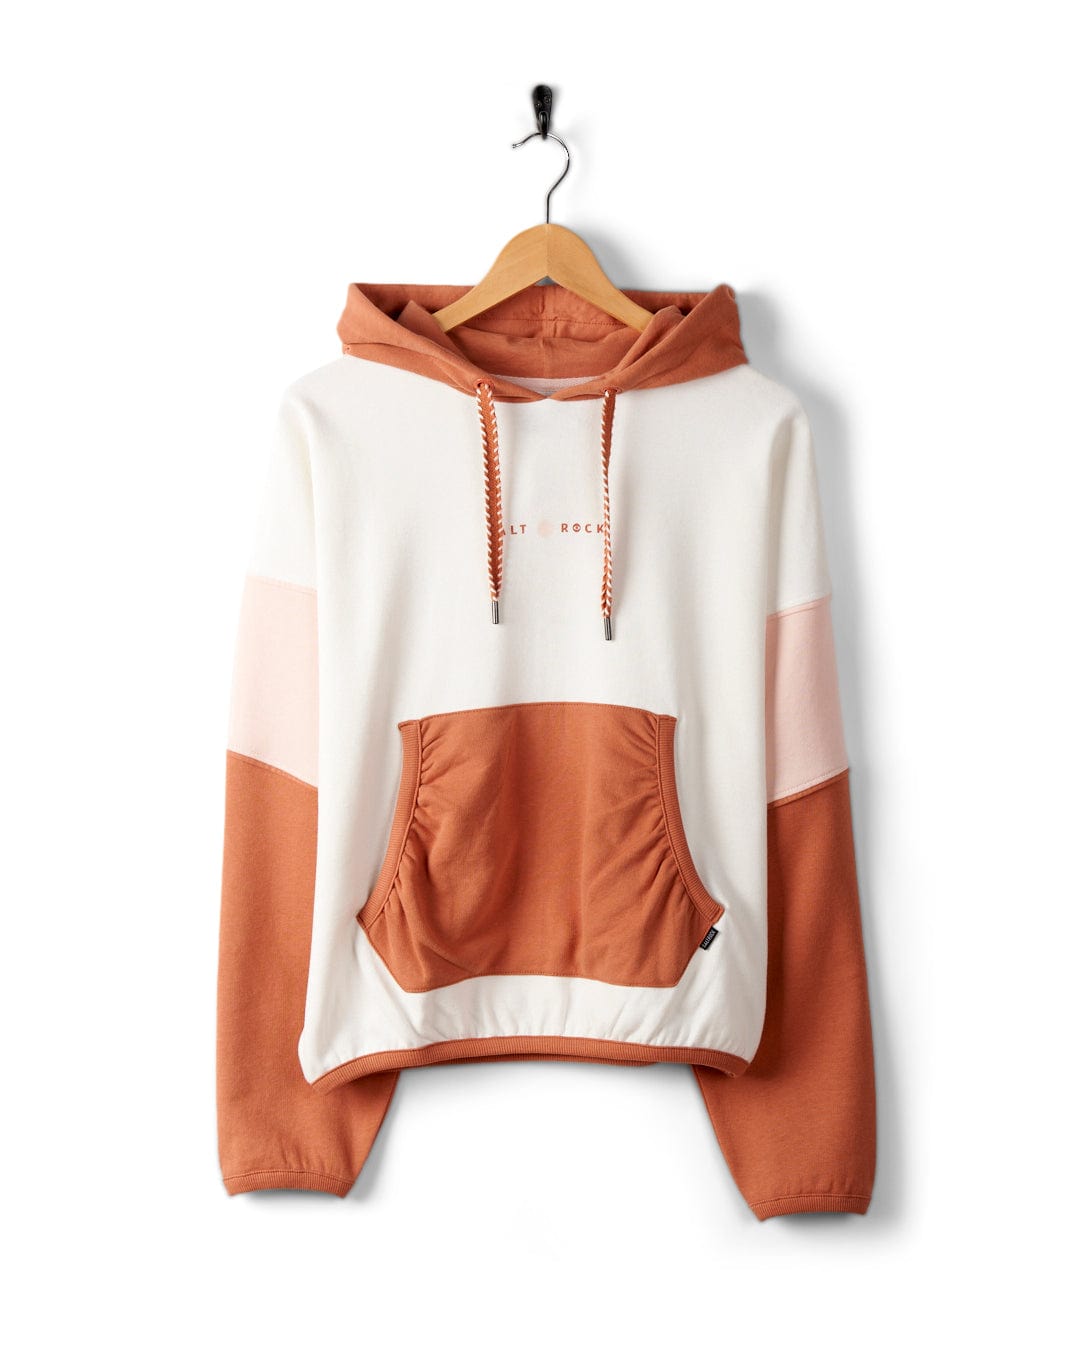 A Palmera - Womens Pop Hoodie - Cream with white, pink, and brown sections, featuring Saltrock branding, a front pouch pocket, and a drawstring at the hood. Made from cozy cotton for a loose fit, it hangs on a wooden hanger.